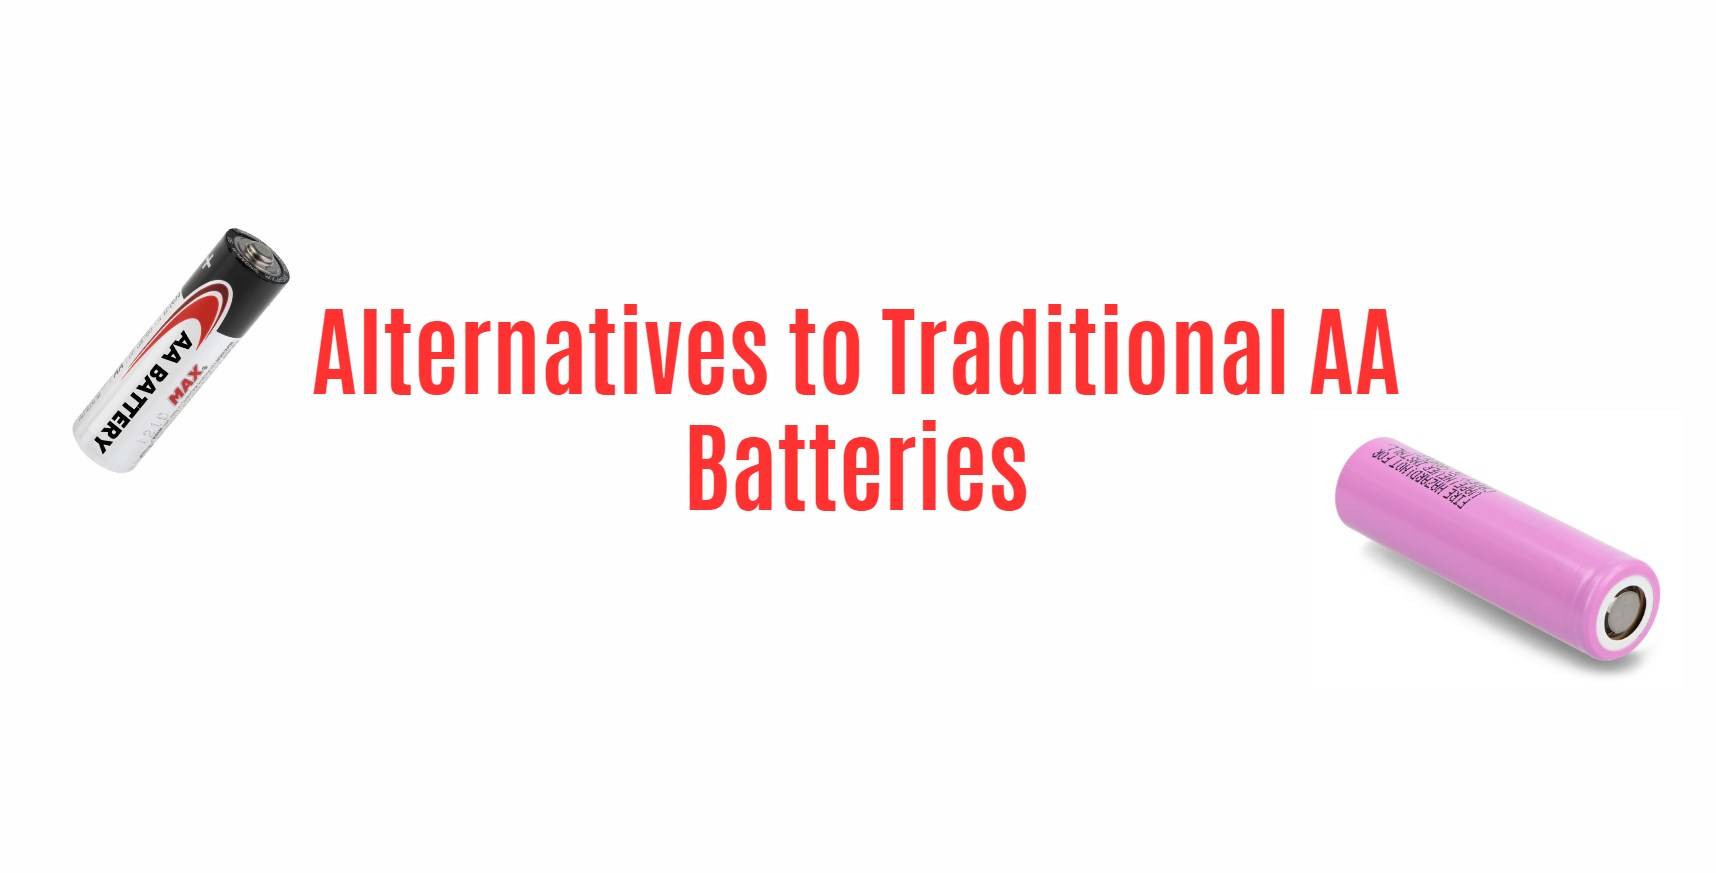 Alternatives to Traditional AA Batteries